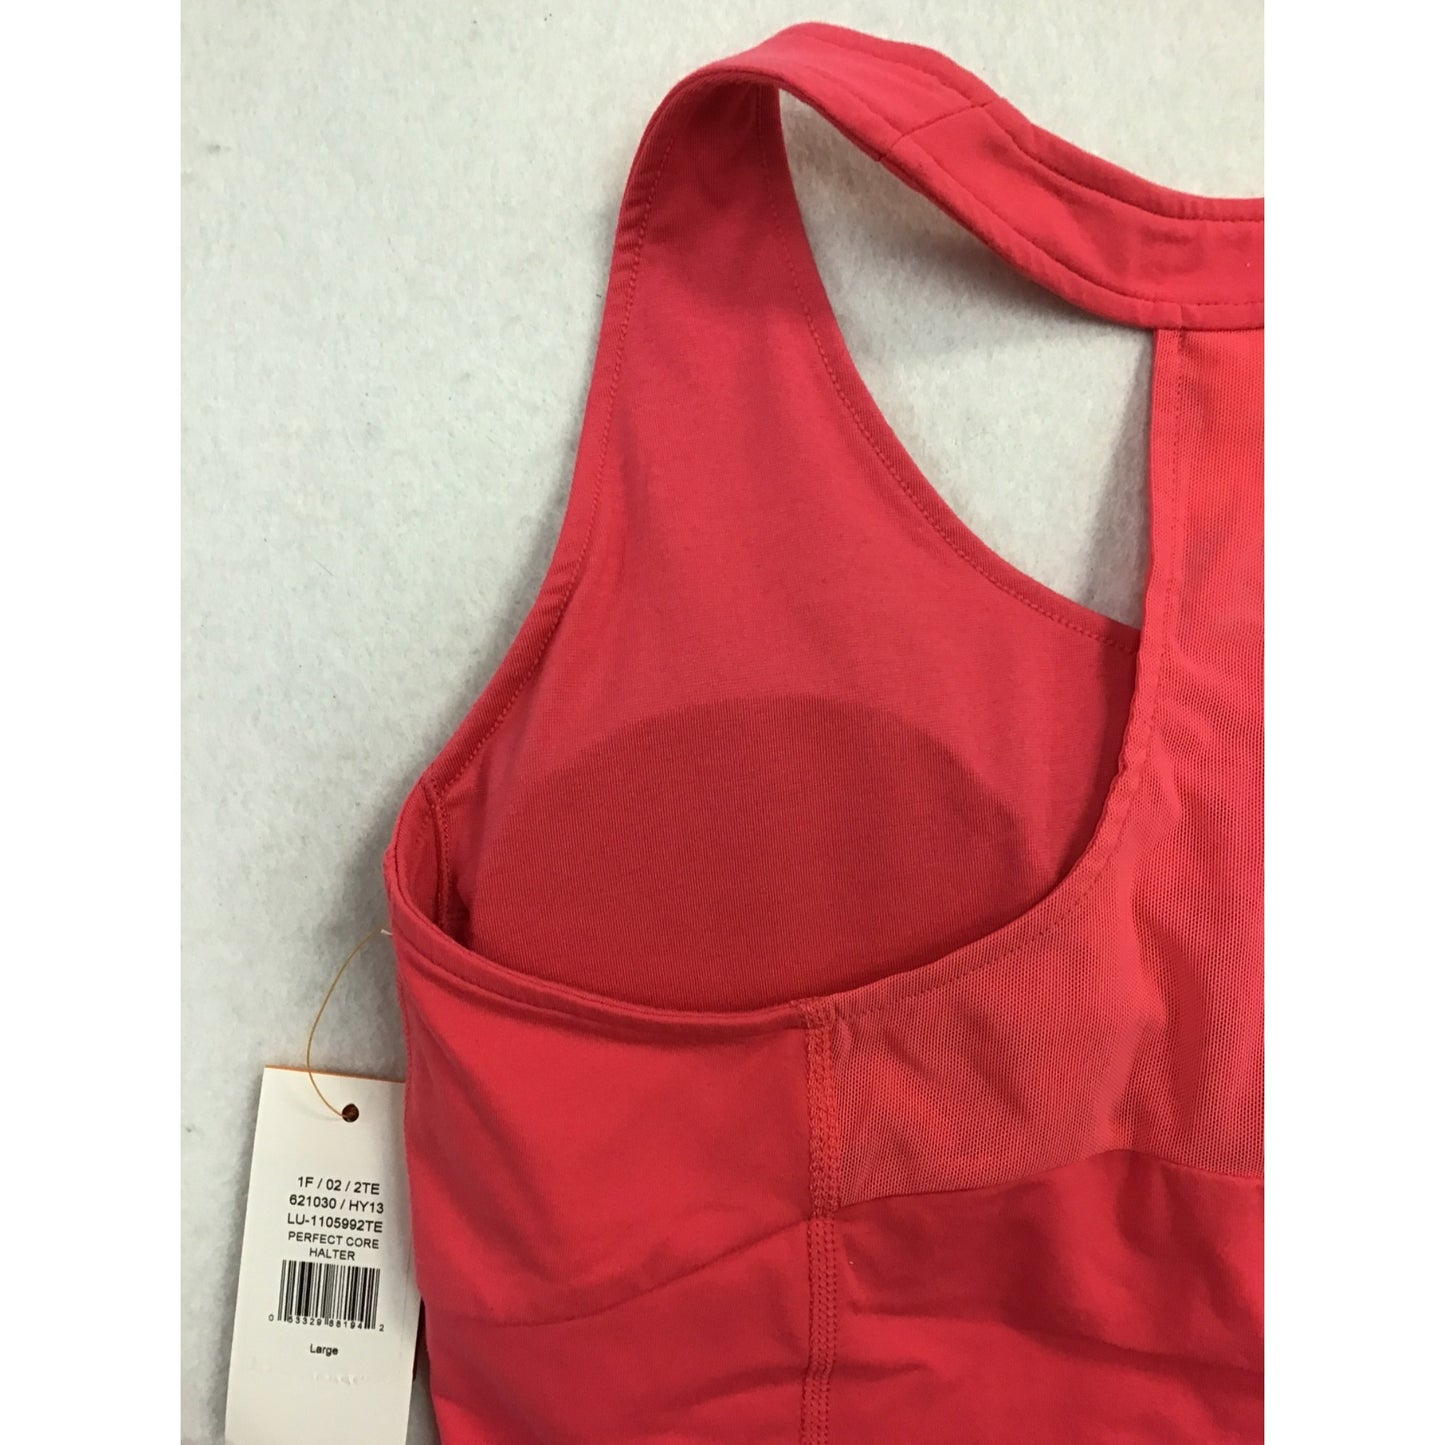 Women’s Compression Athletic Tank-Top